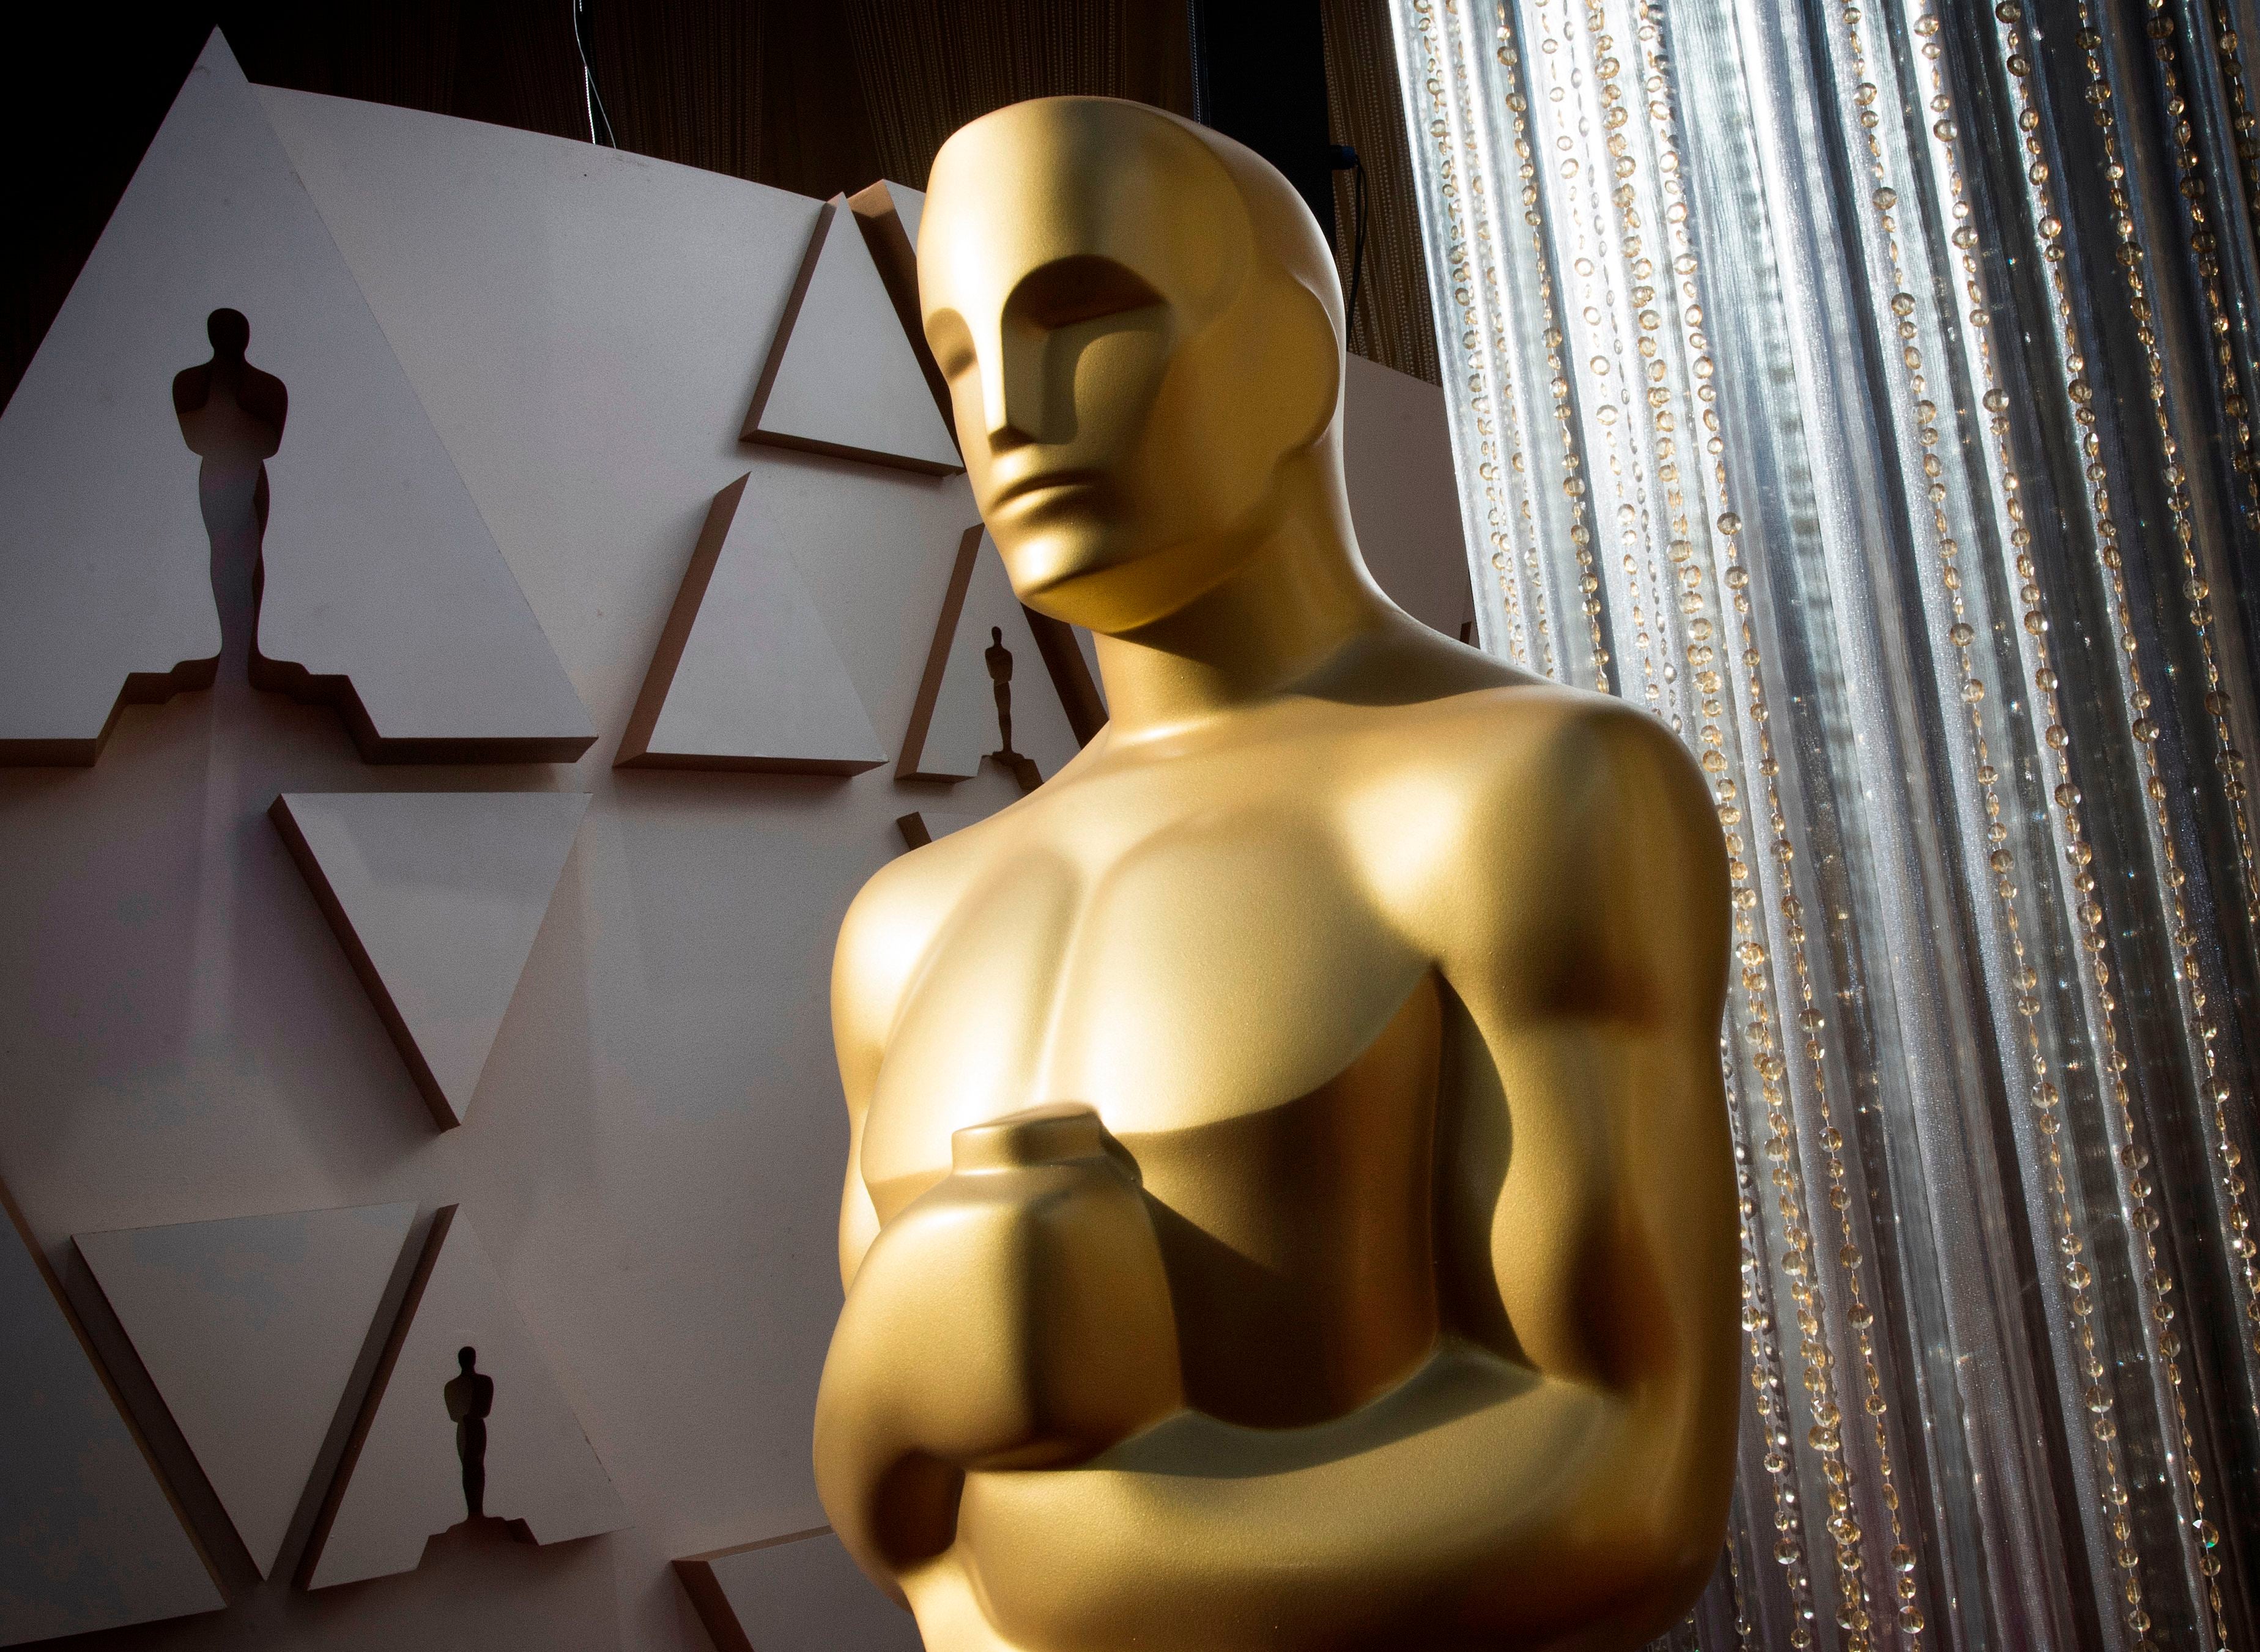 Oscars statue displayed on the red carpet area on the eve of 92nd Oscars at the Dolby Theatre in Hollywood, on 8 February, 2020